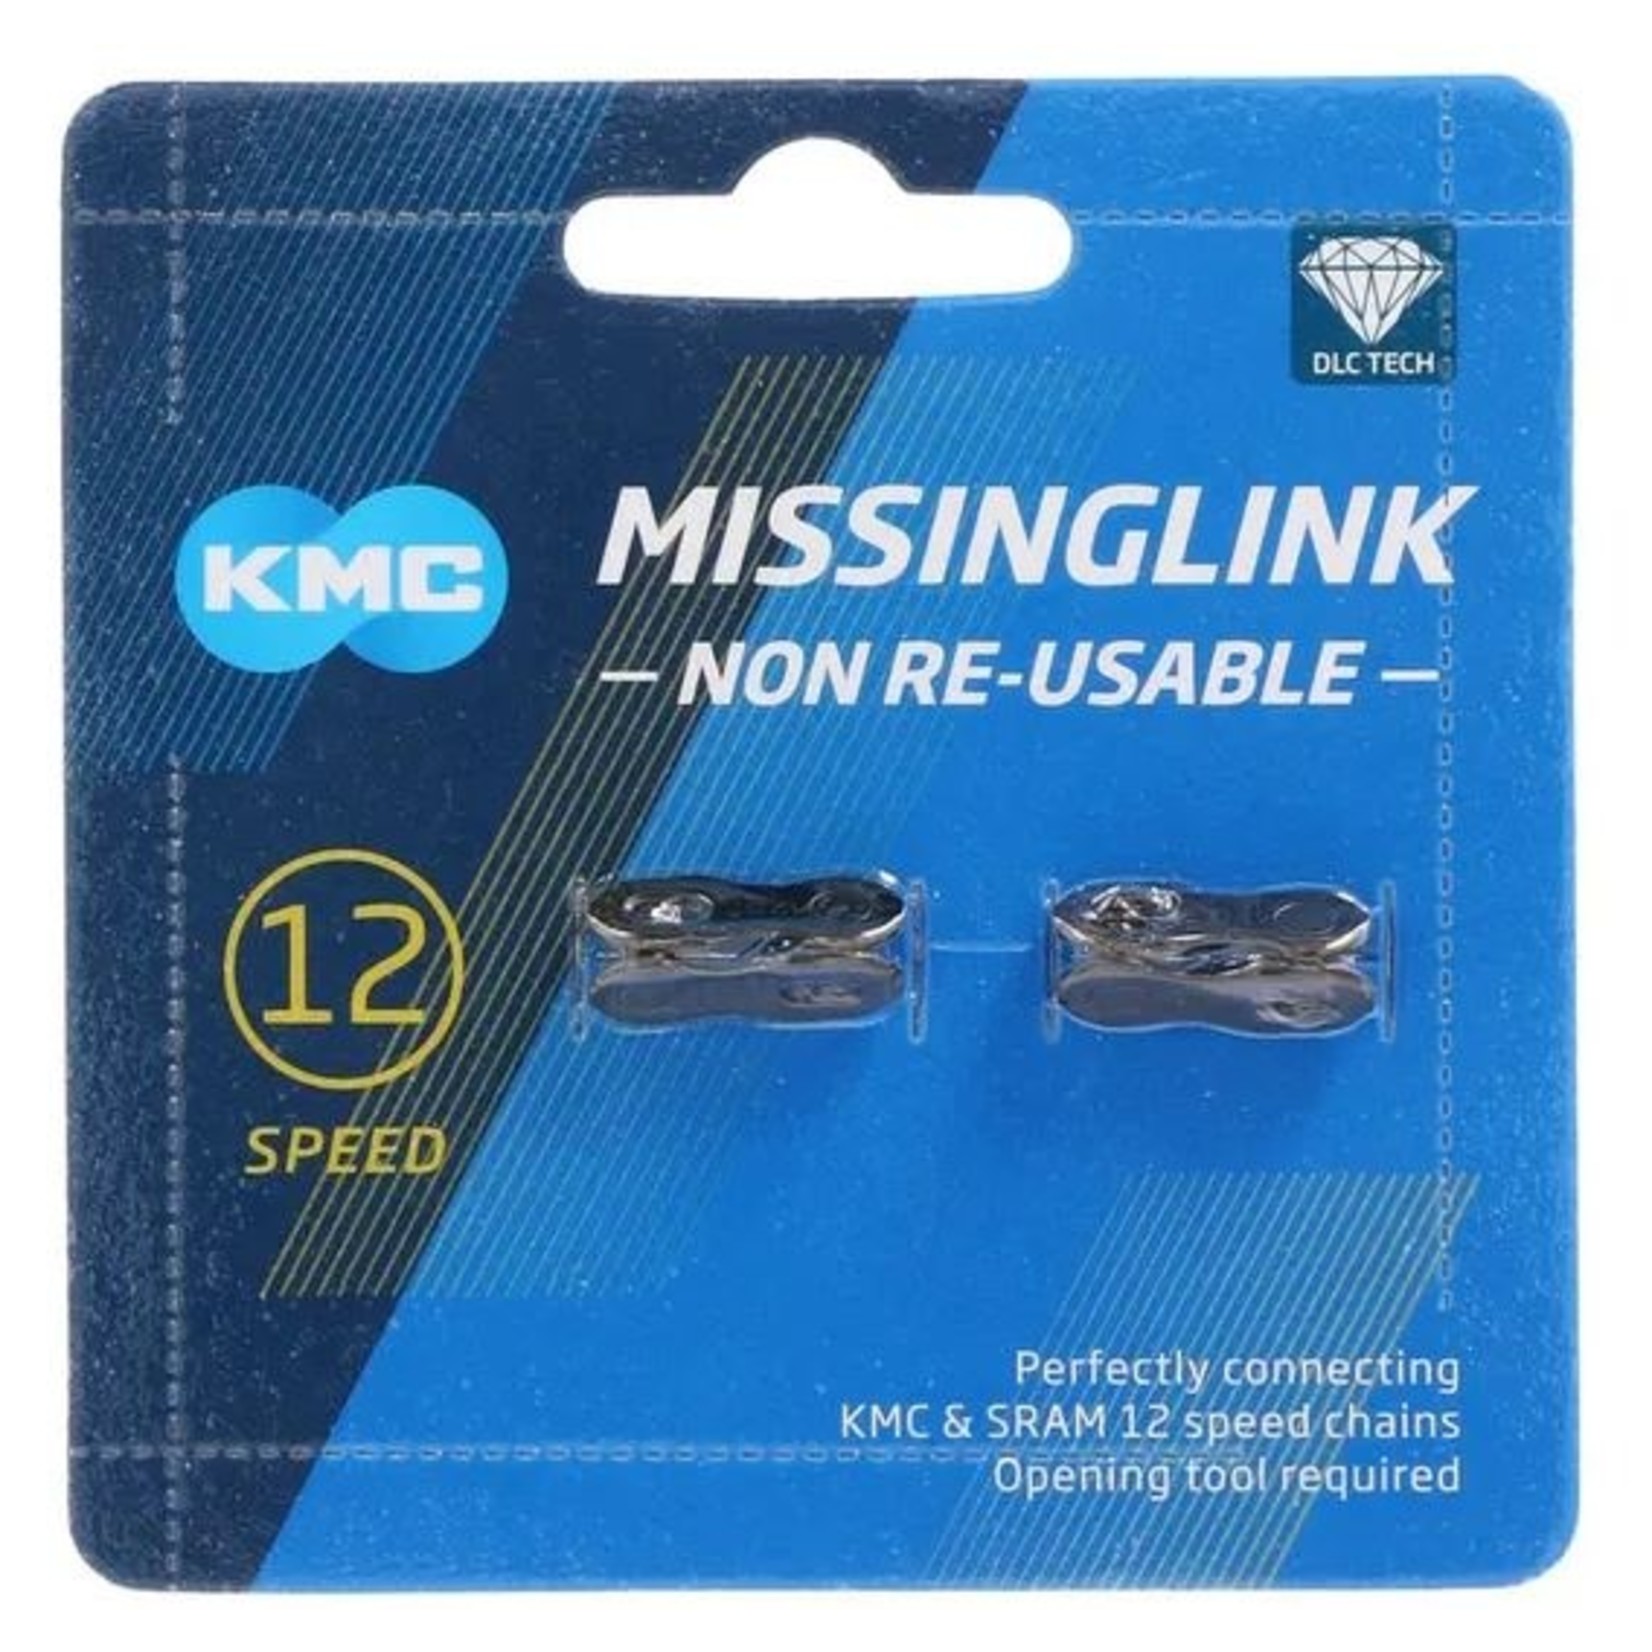 KMC KMC Bike Connecting Chain Links - 12 Speed Non Re-Usable Card of 2 - Silver